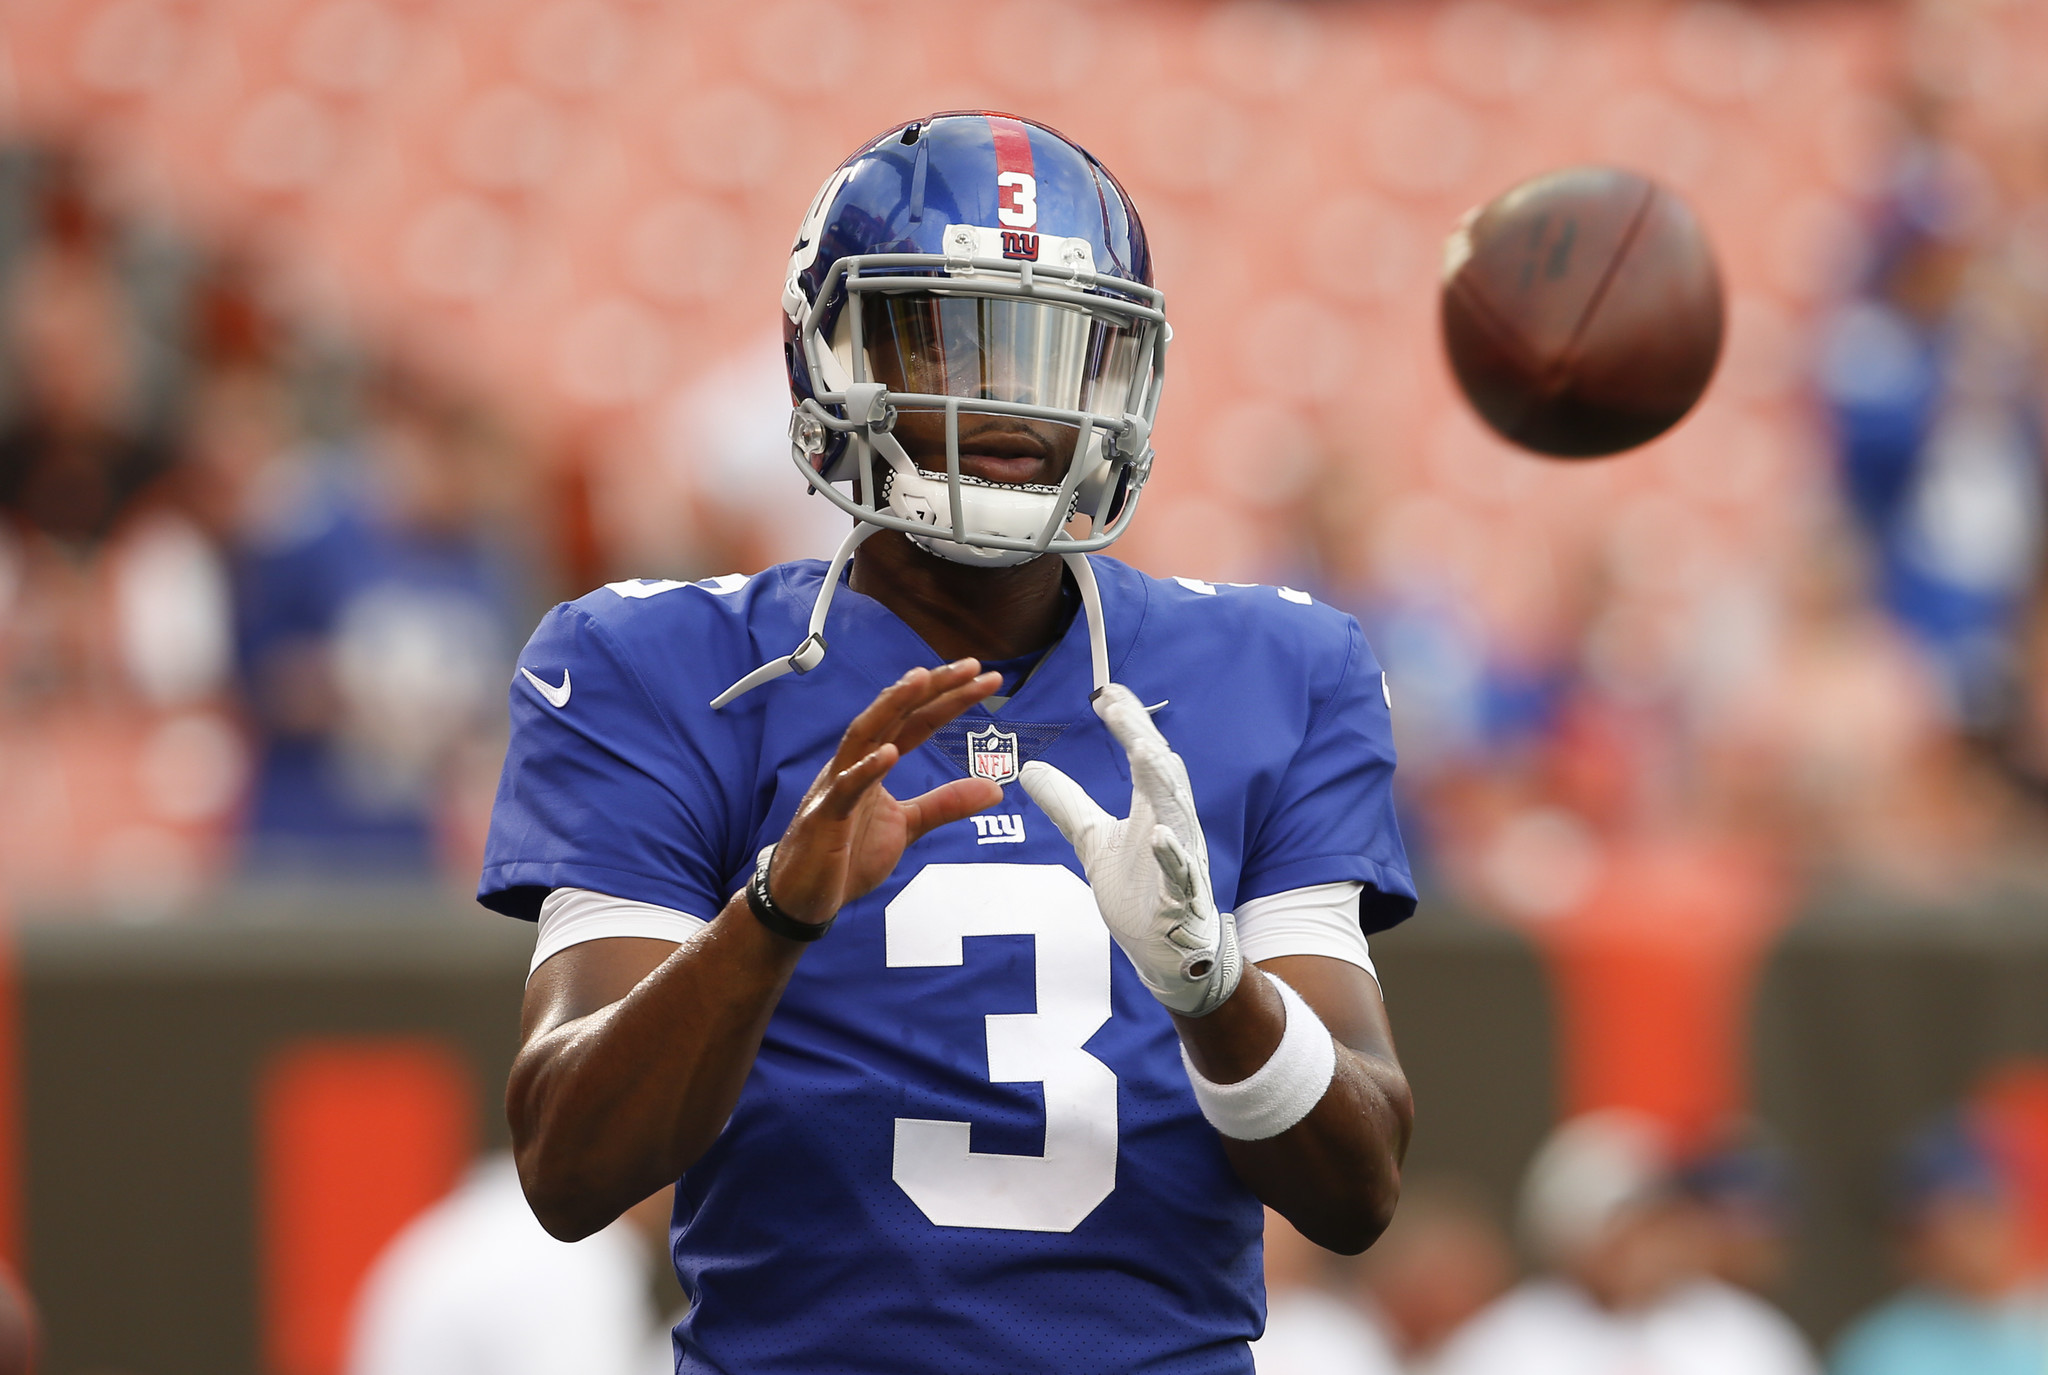 Geno Smith will start in place of Eli Manning for the Giants - Chicago Tribune2048 x 1375